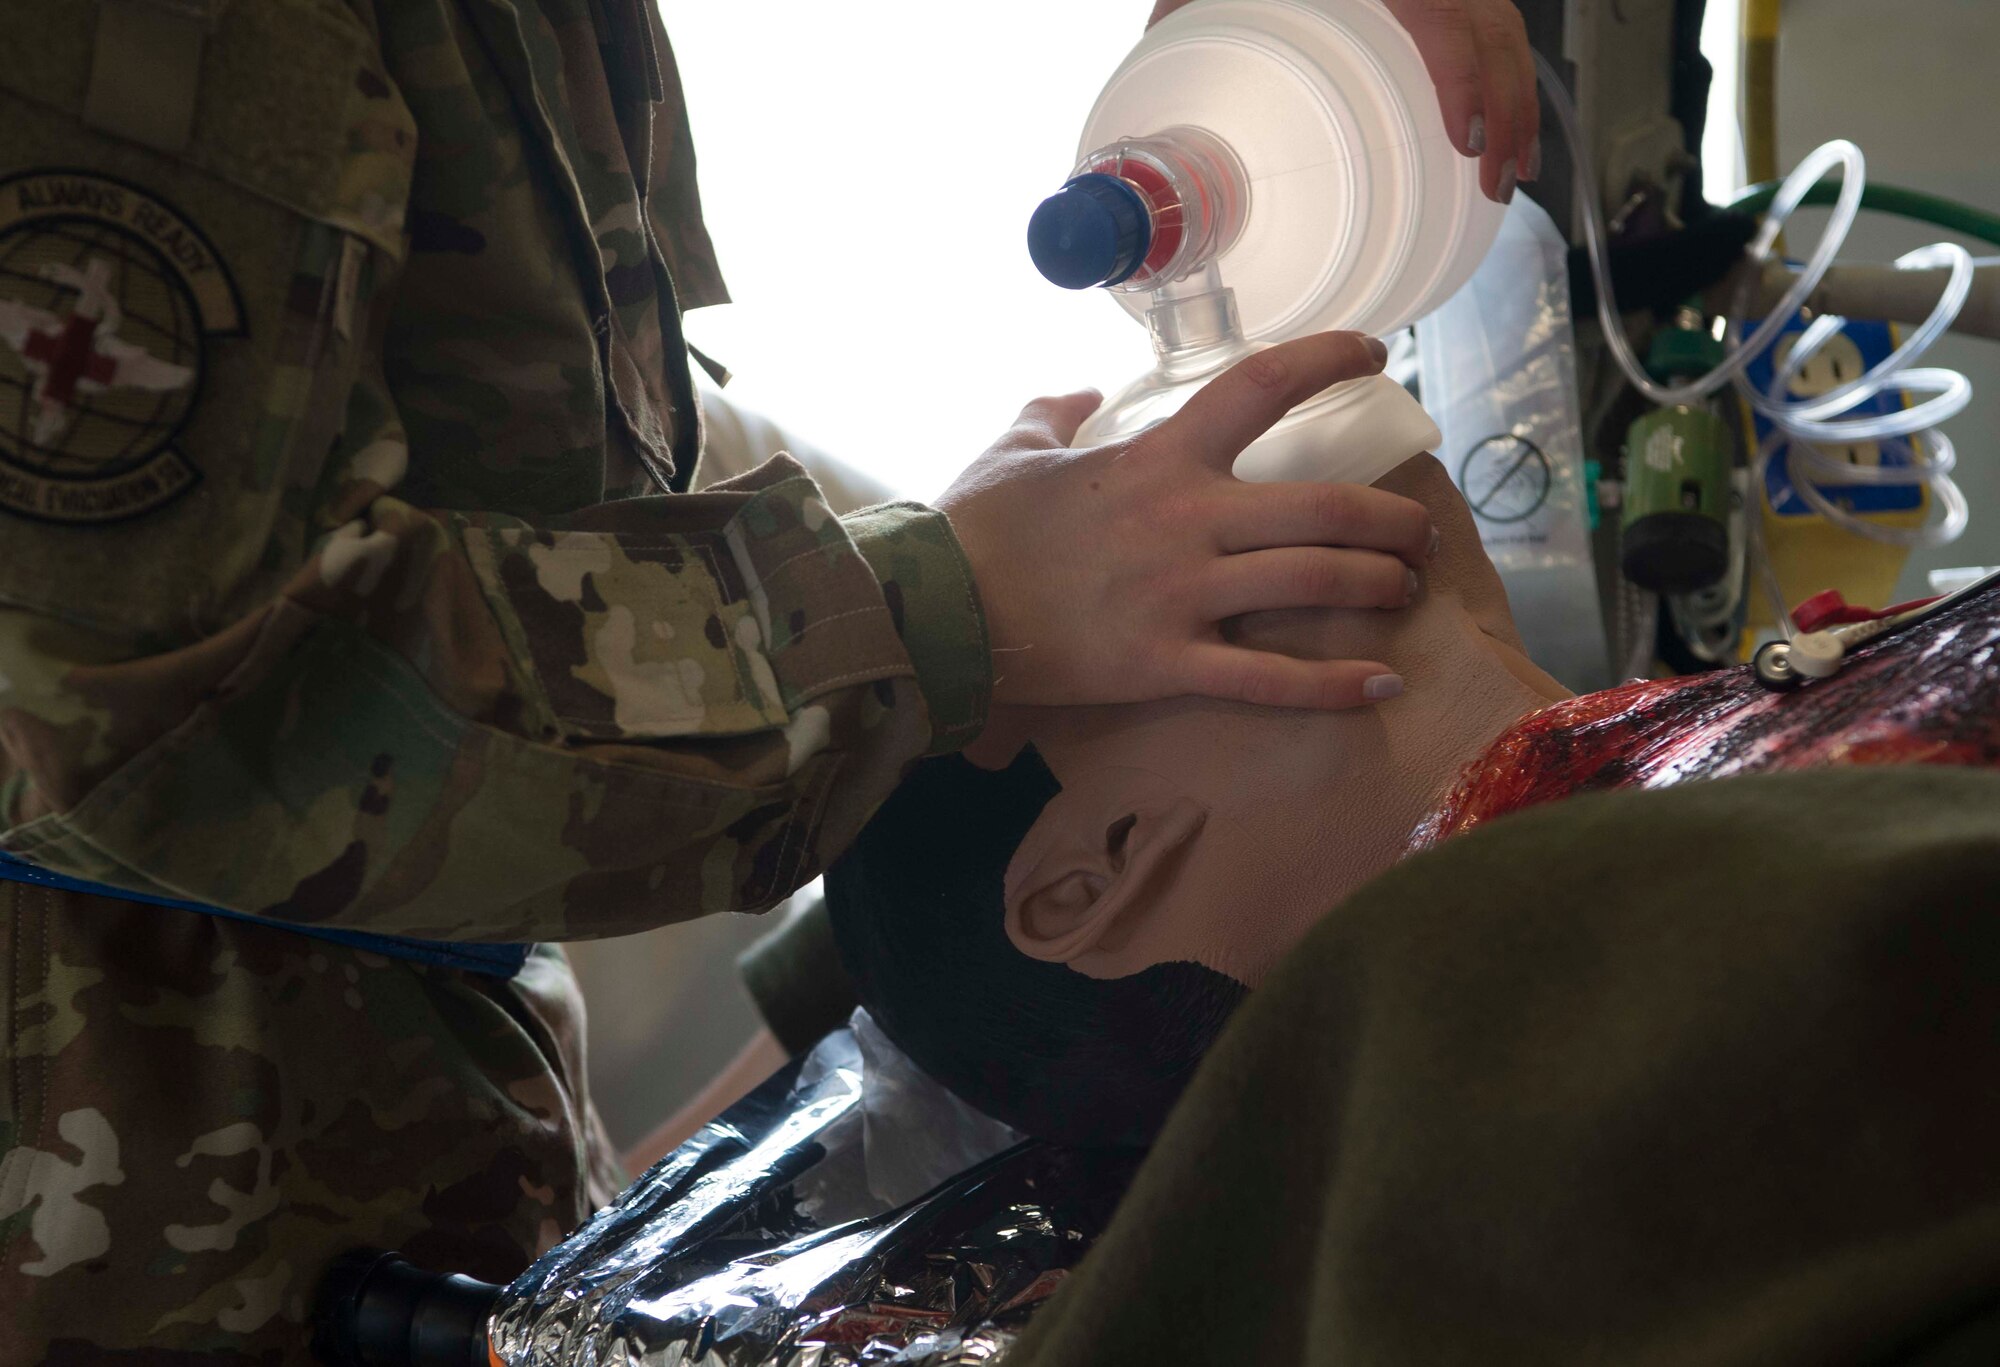 Ramstein airmen respond to real medical emergency during basewide